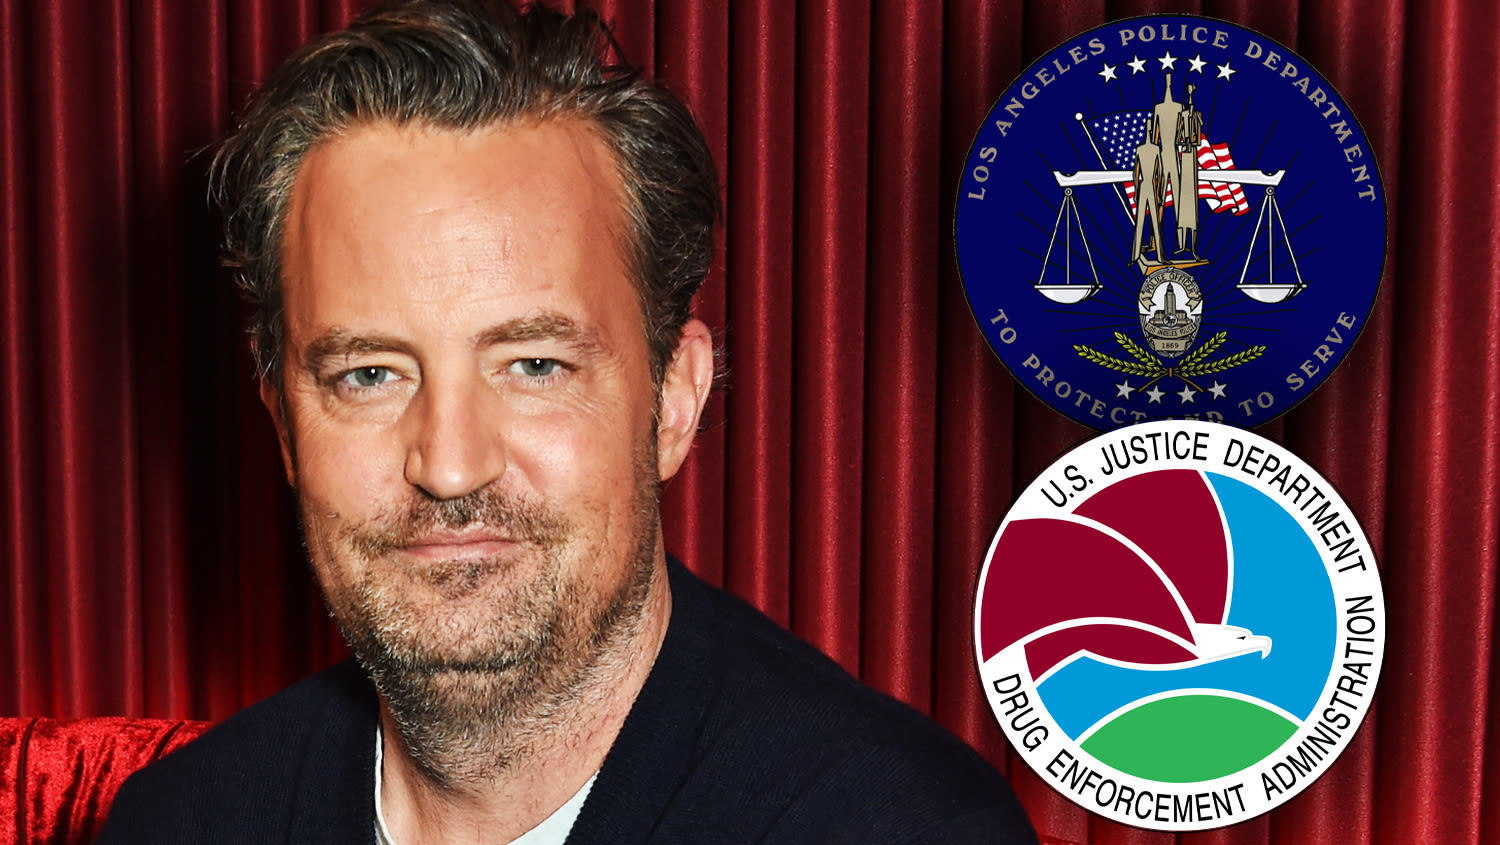 Matthew Perry’s Death From Ketamine Sees LAPD & DEA Team-Up For Investigation On “Circumstances”